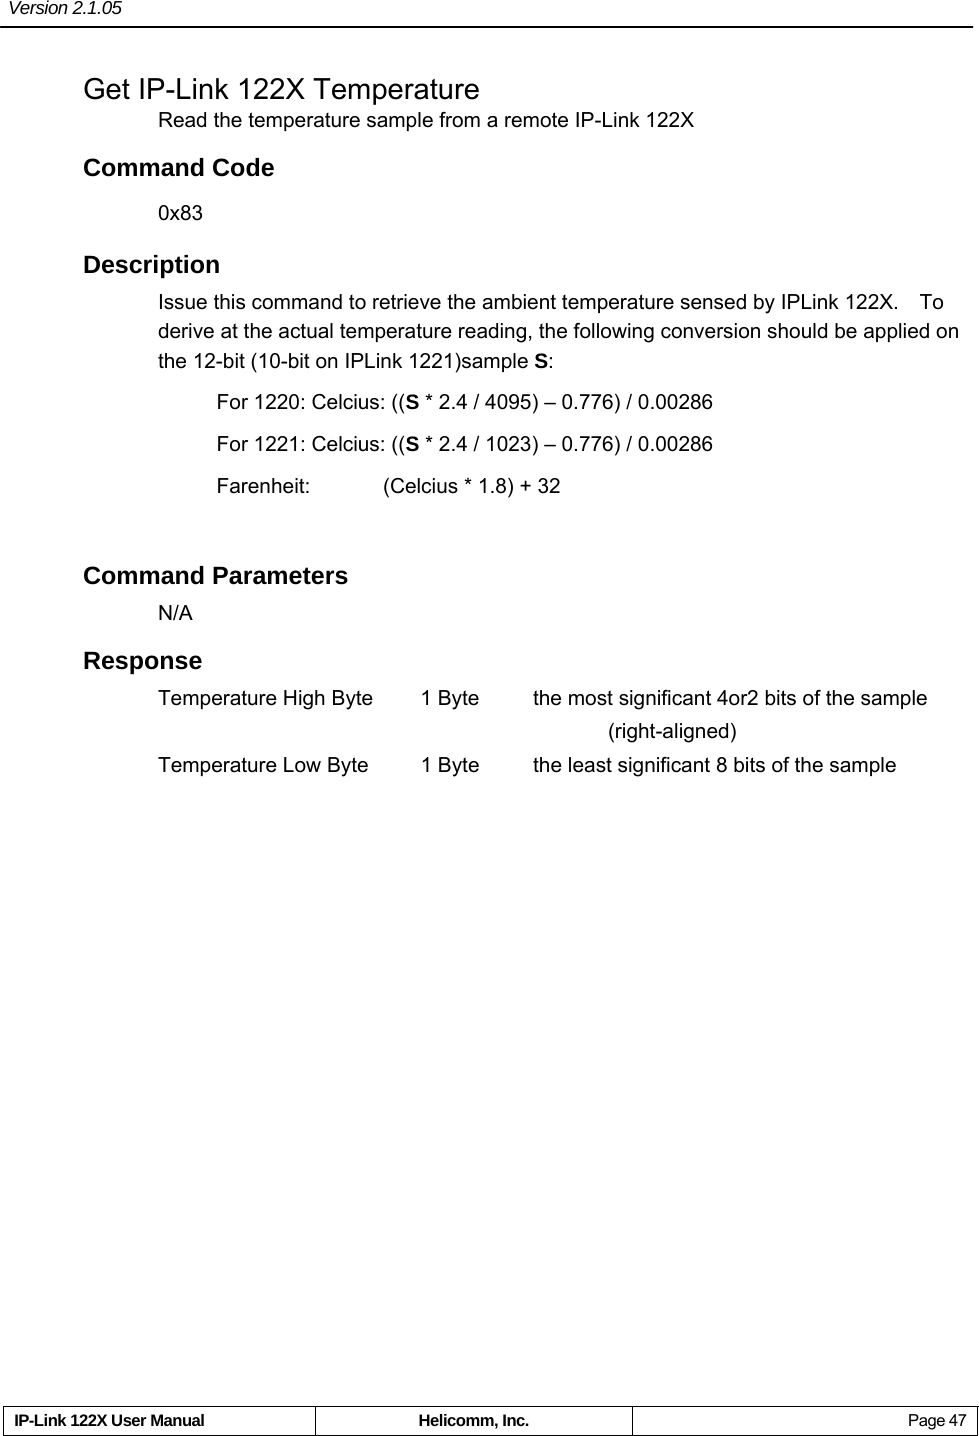 Version 2.1.05     IP-Link 122X User Manual  Helicomm, Inc.  Page 47 Get IP-Link 122X Temperature Read the temperature sample from a remote IP-Link 122X Command Code 0x83 Description Issue this command to retrieve the ambient temperature sensed by IPLink 122X.    To derive at the actual temperature reading, the following conversion should be applied on the 12-bit (10-bit on IPLink 1221)sample S: For 1220: Celcius: ((S * 2.4 / 4095) – 0.776) / 0.00286 For 1221: Celcius: ((S * 2.4 / 1023) – 0.776) / 0.00286 Farenheit:    (Celcius * 1.8) + 32  Command Parameters N/A Response Temperature High Byte  1 Byte  the most significant 4or2 bits of the sample        (right-aligned) Temperature Low Byte  1 Byte  the least significant 8 bits of the sample   